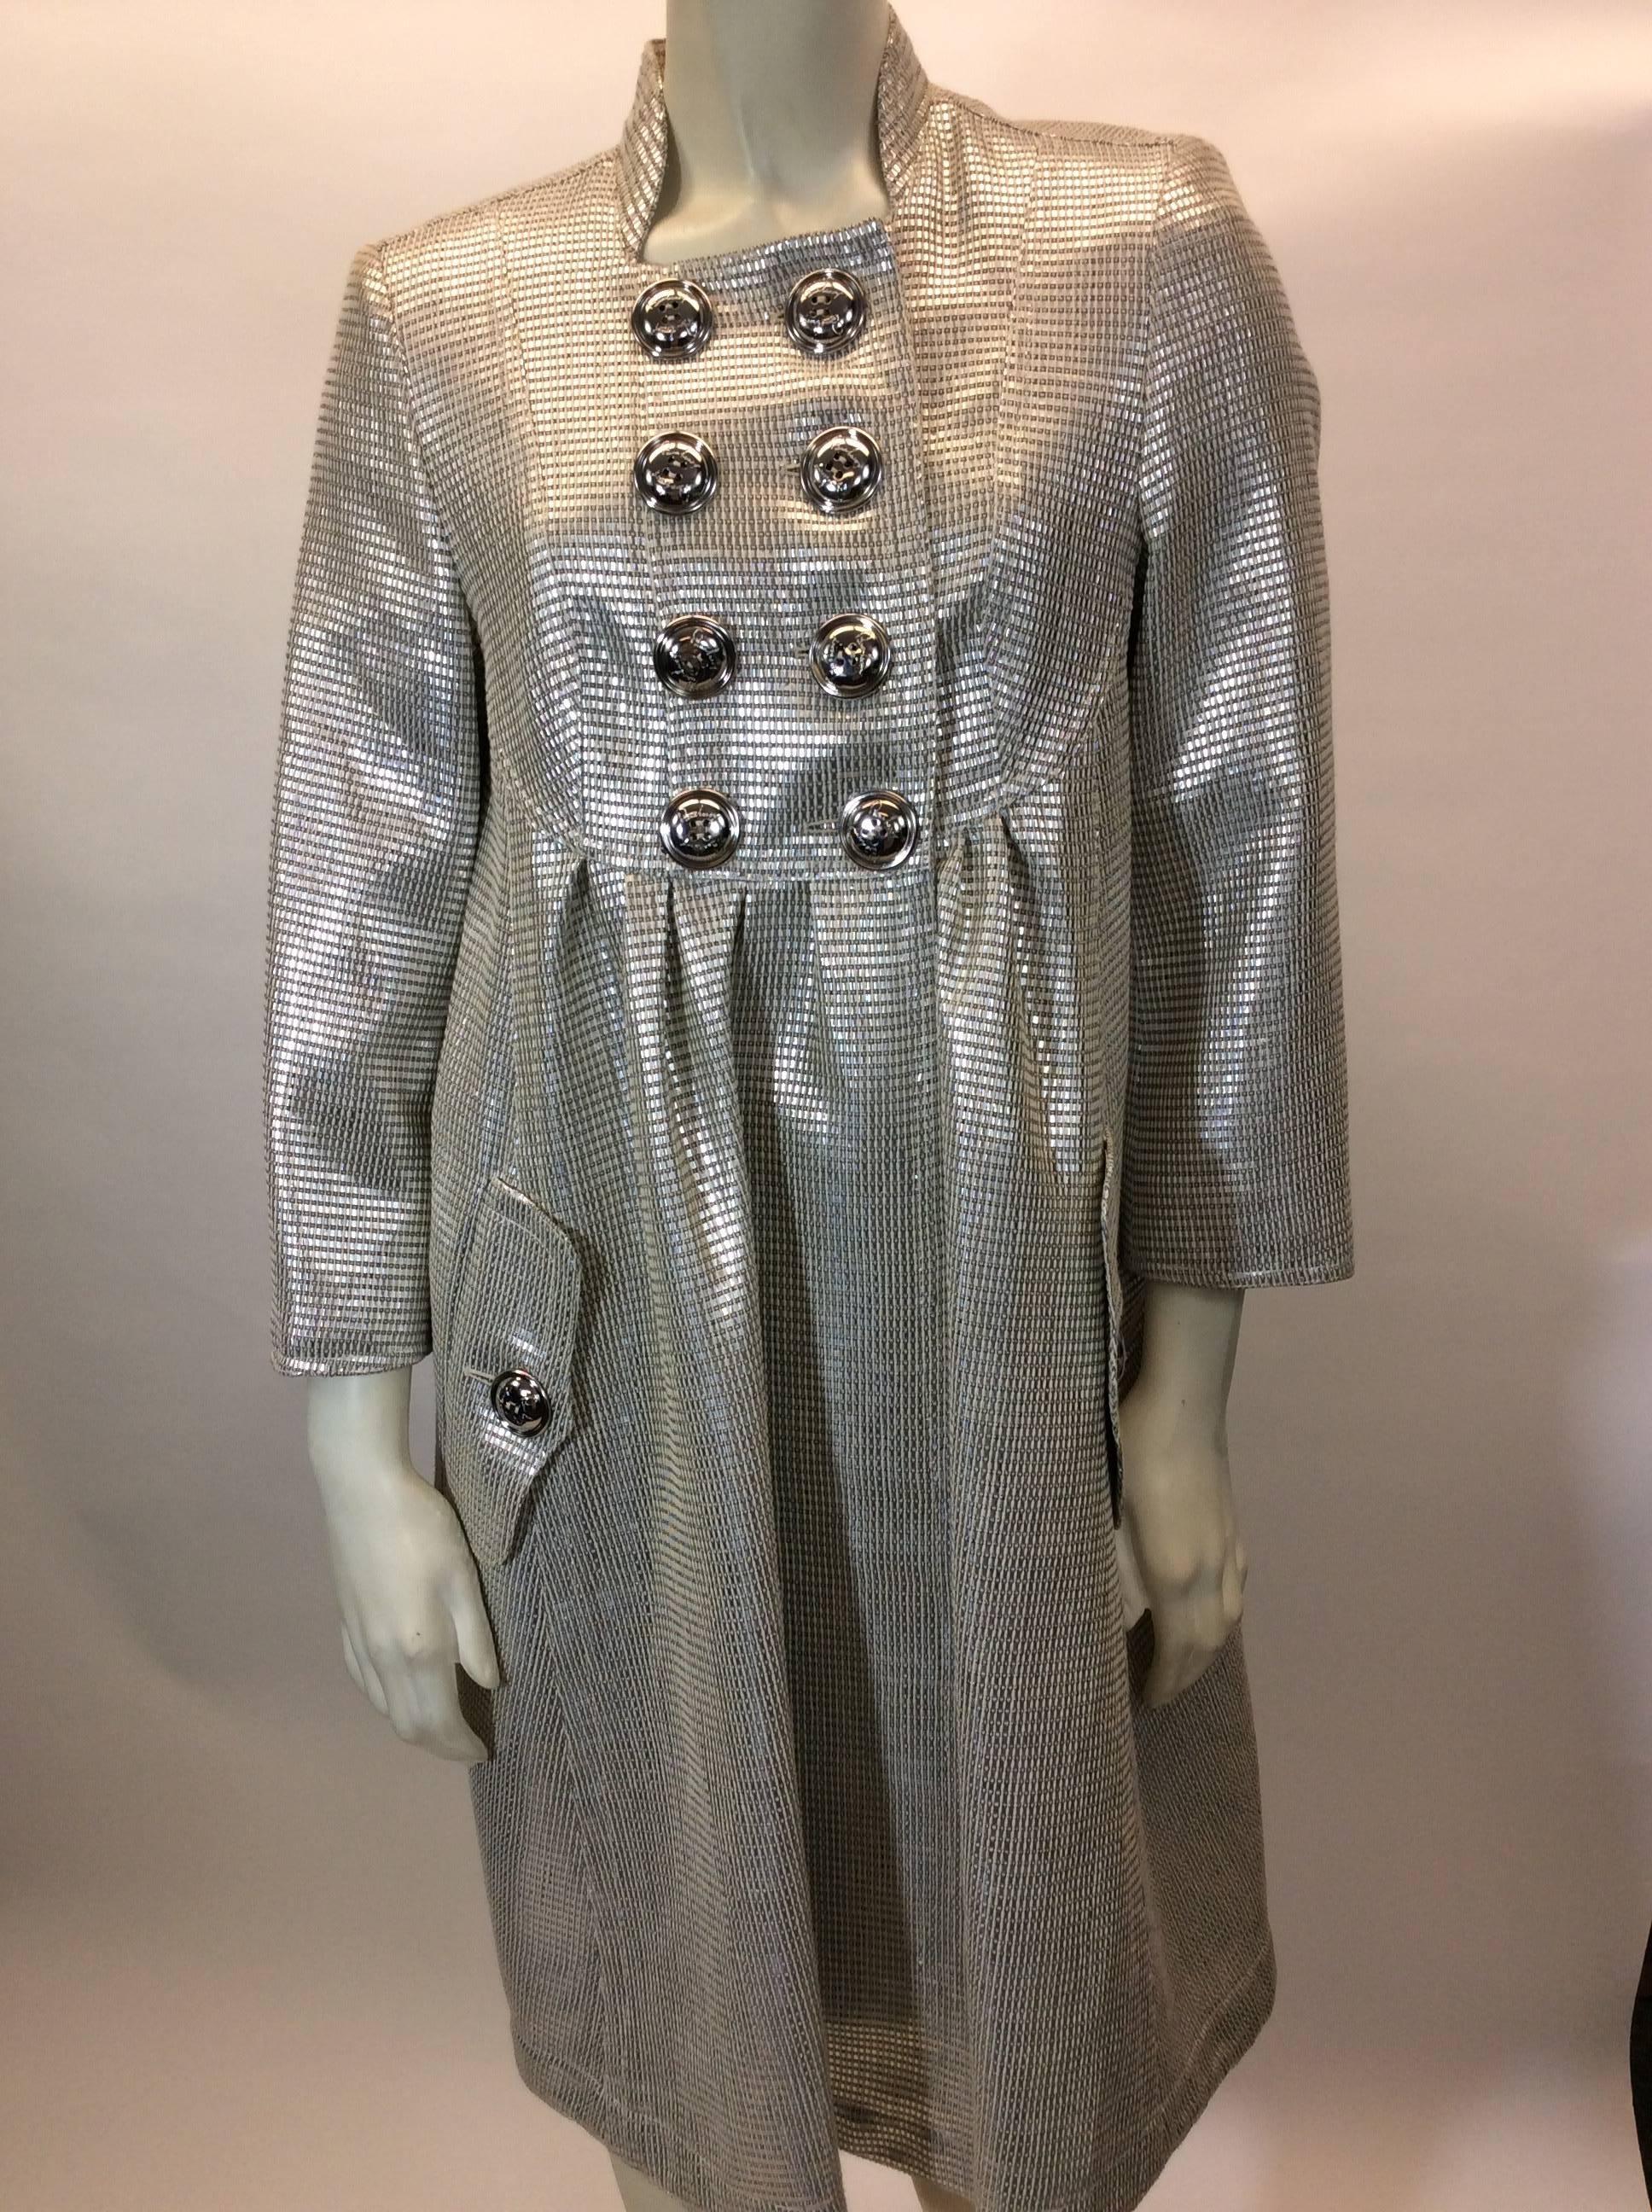 Burberry Evening Coat
-Size 42
-Lined
-Silver Metallic, w/ cream weave
-2 front pockets
-Silver metal buttons

*One button missing, extra button needs to be sewn on - noted in photo